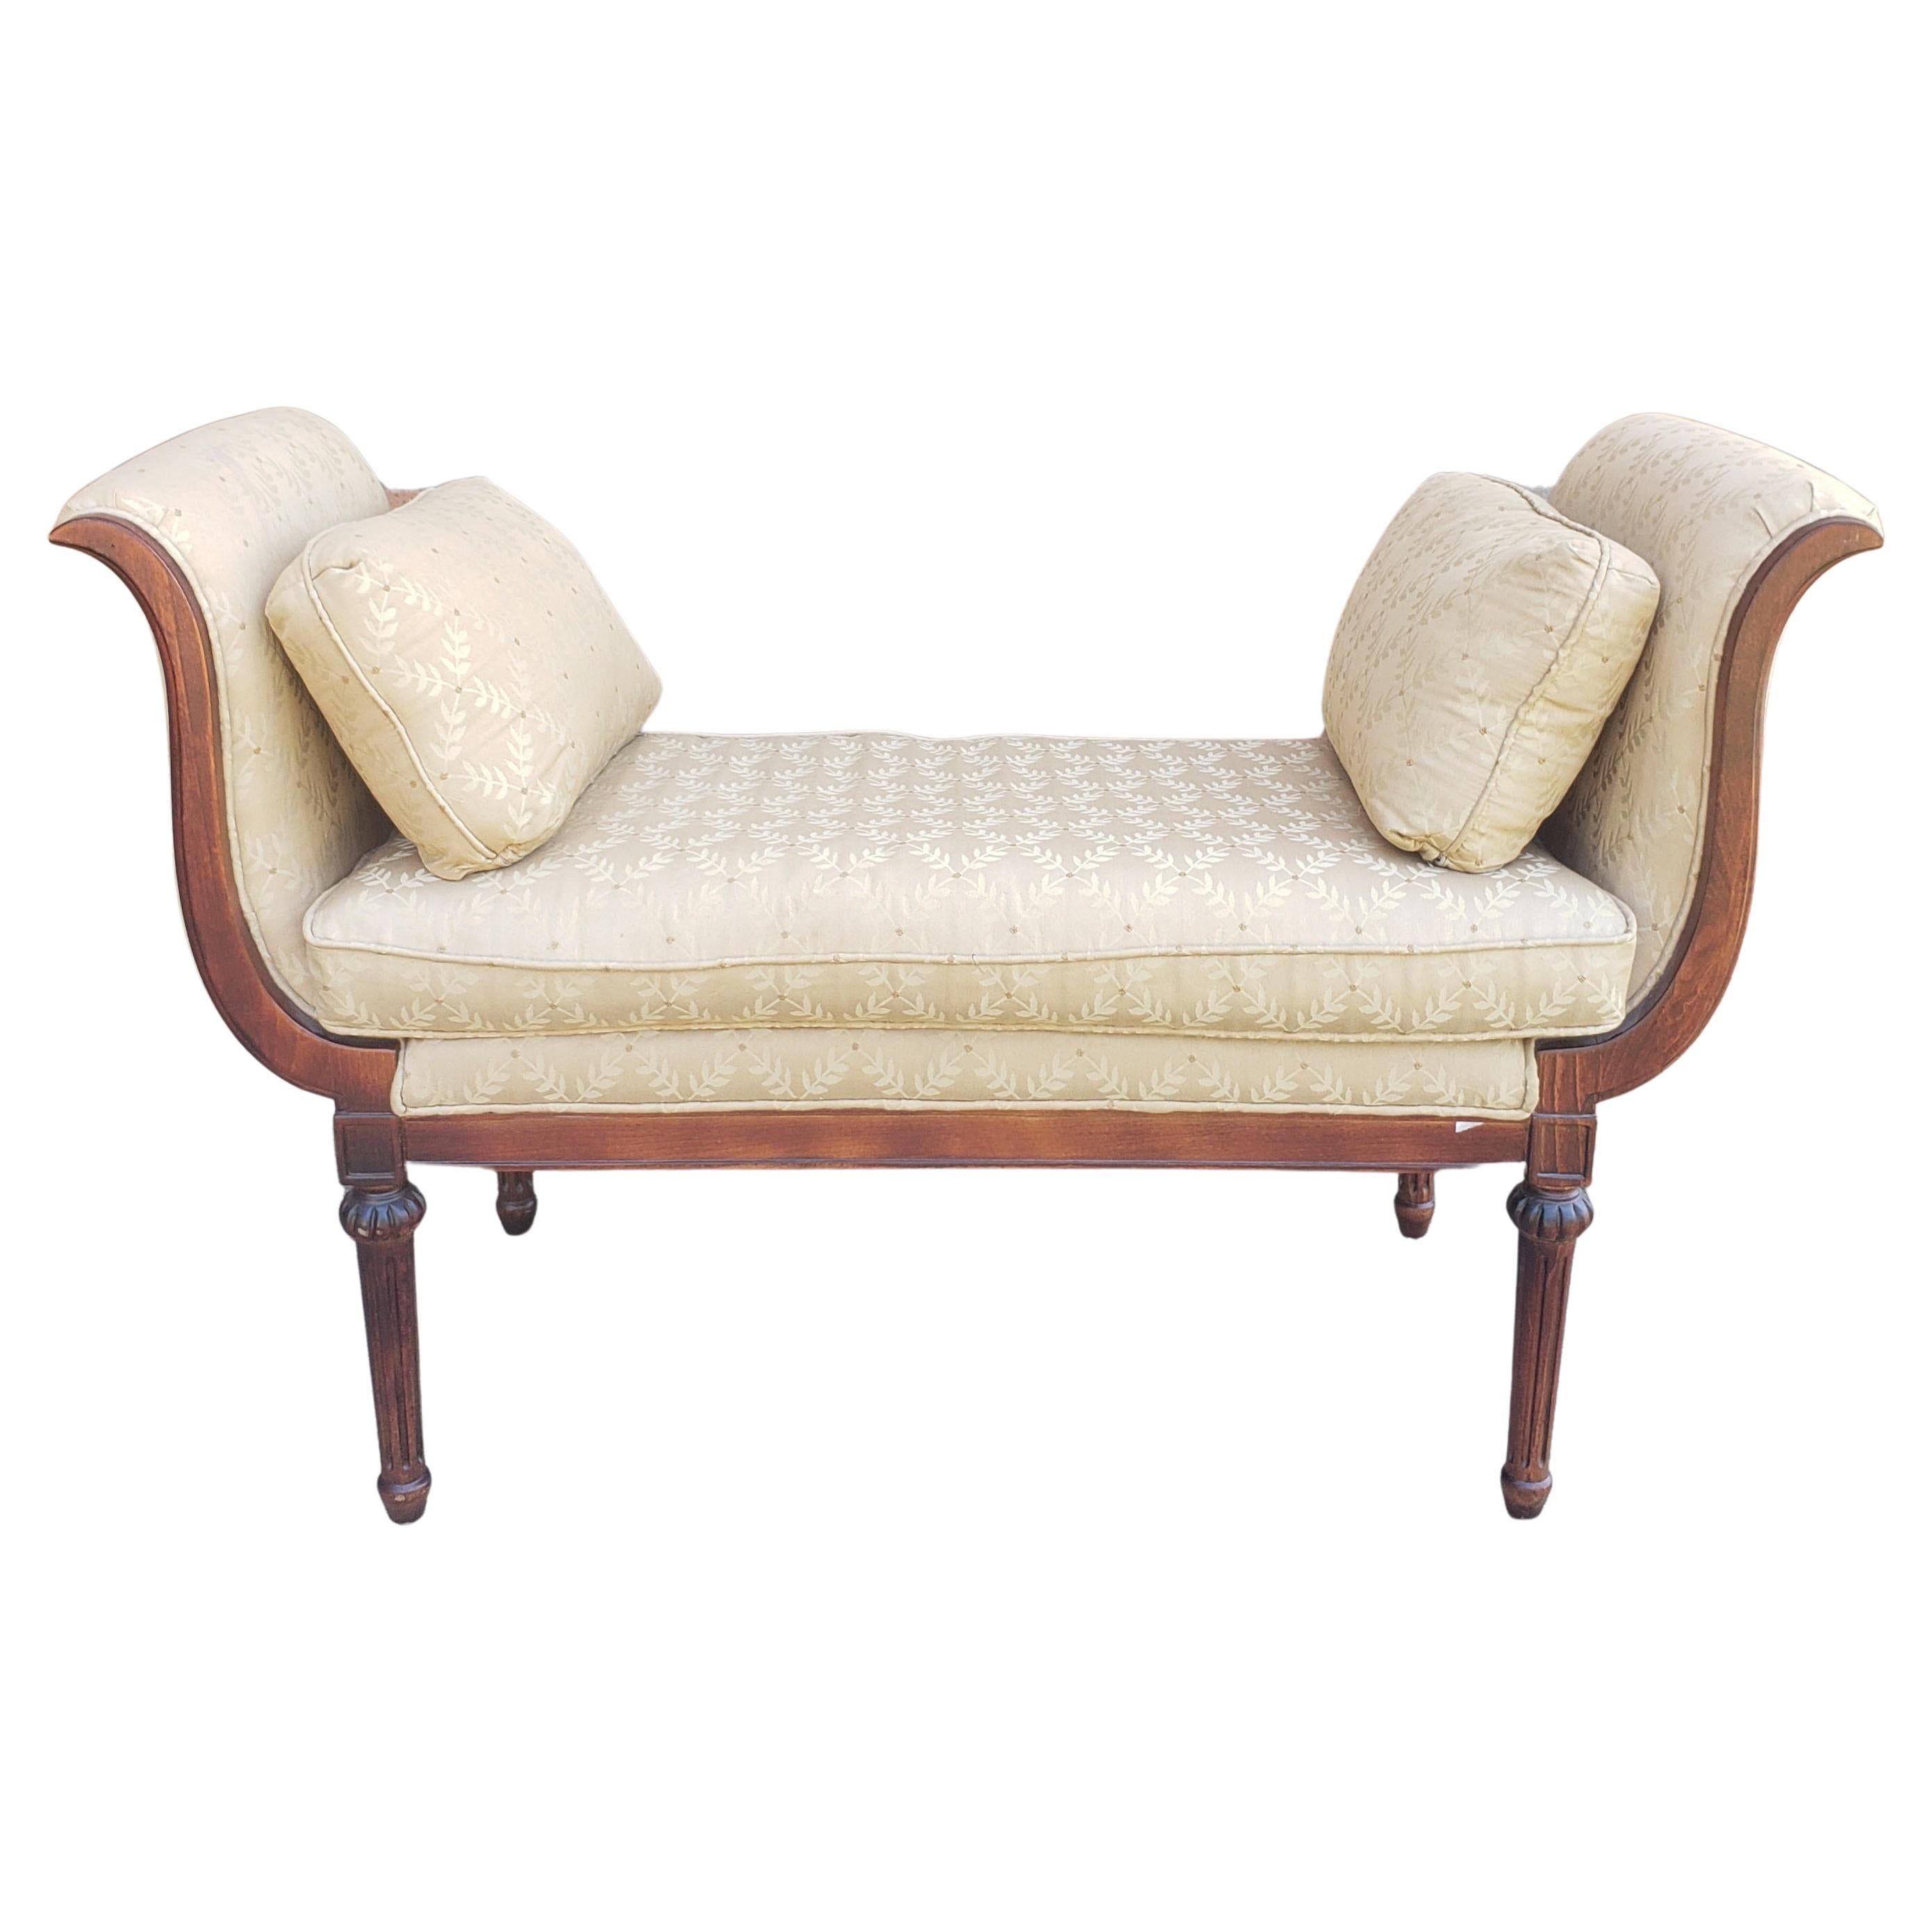 Other Louis XVI Scroll Arms Mahogany and Upholstered Bench with Pillows